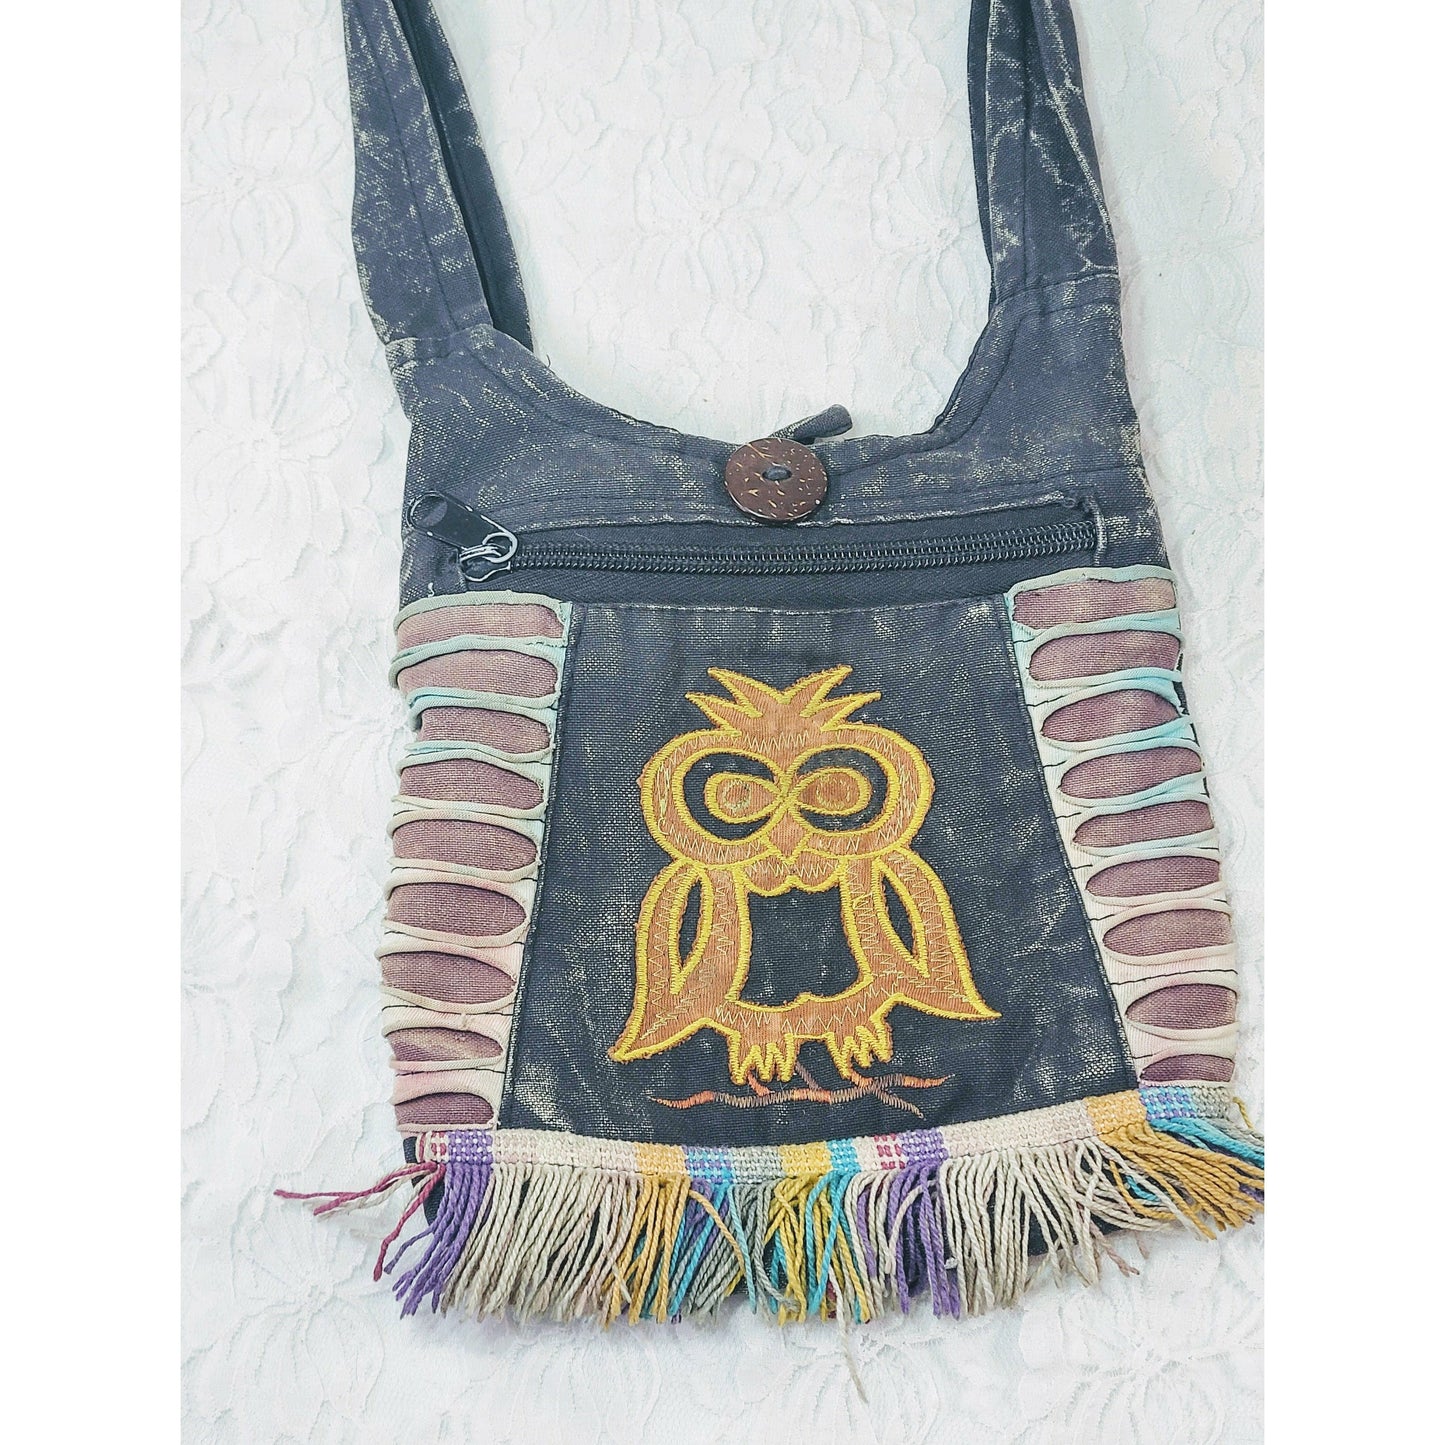 Wise Owl Recycled Textile Crossbody Purse Handbag ~ PERFECT for Phone and Wallet